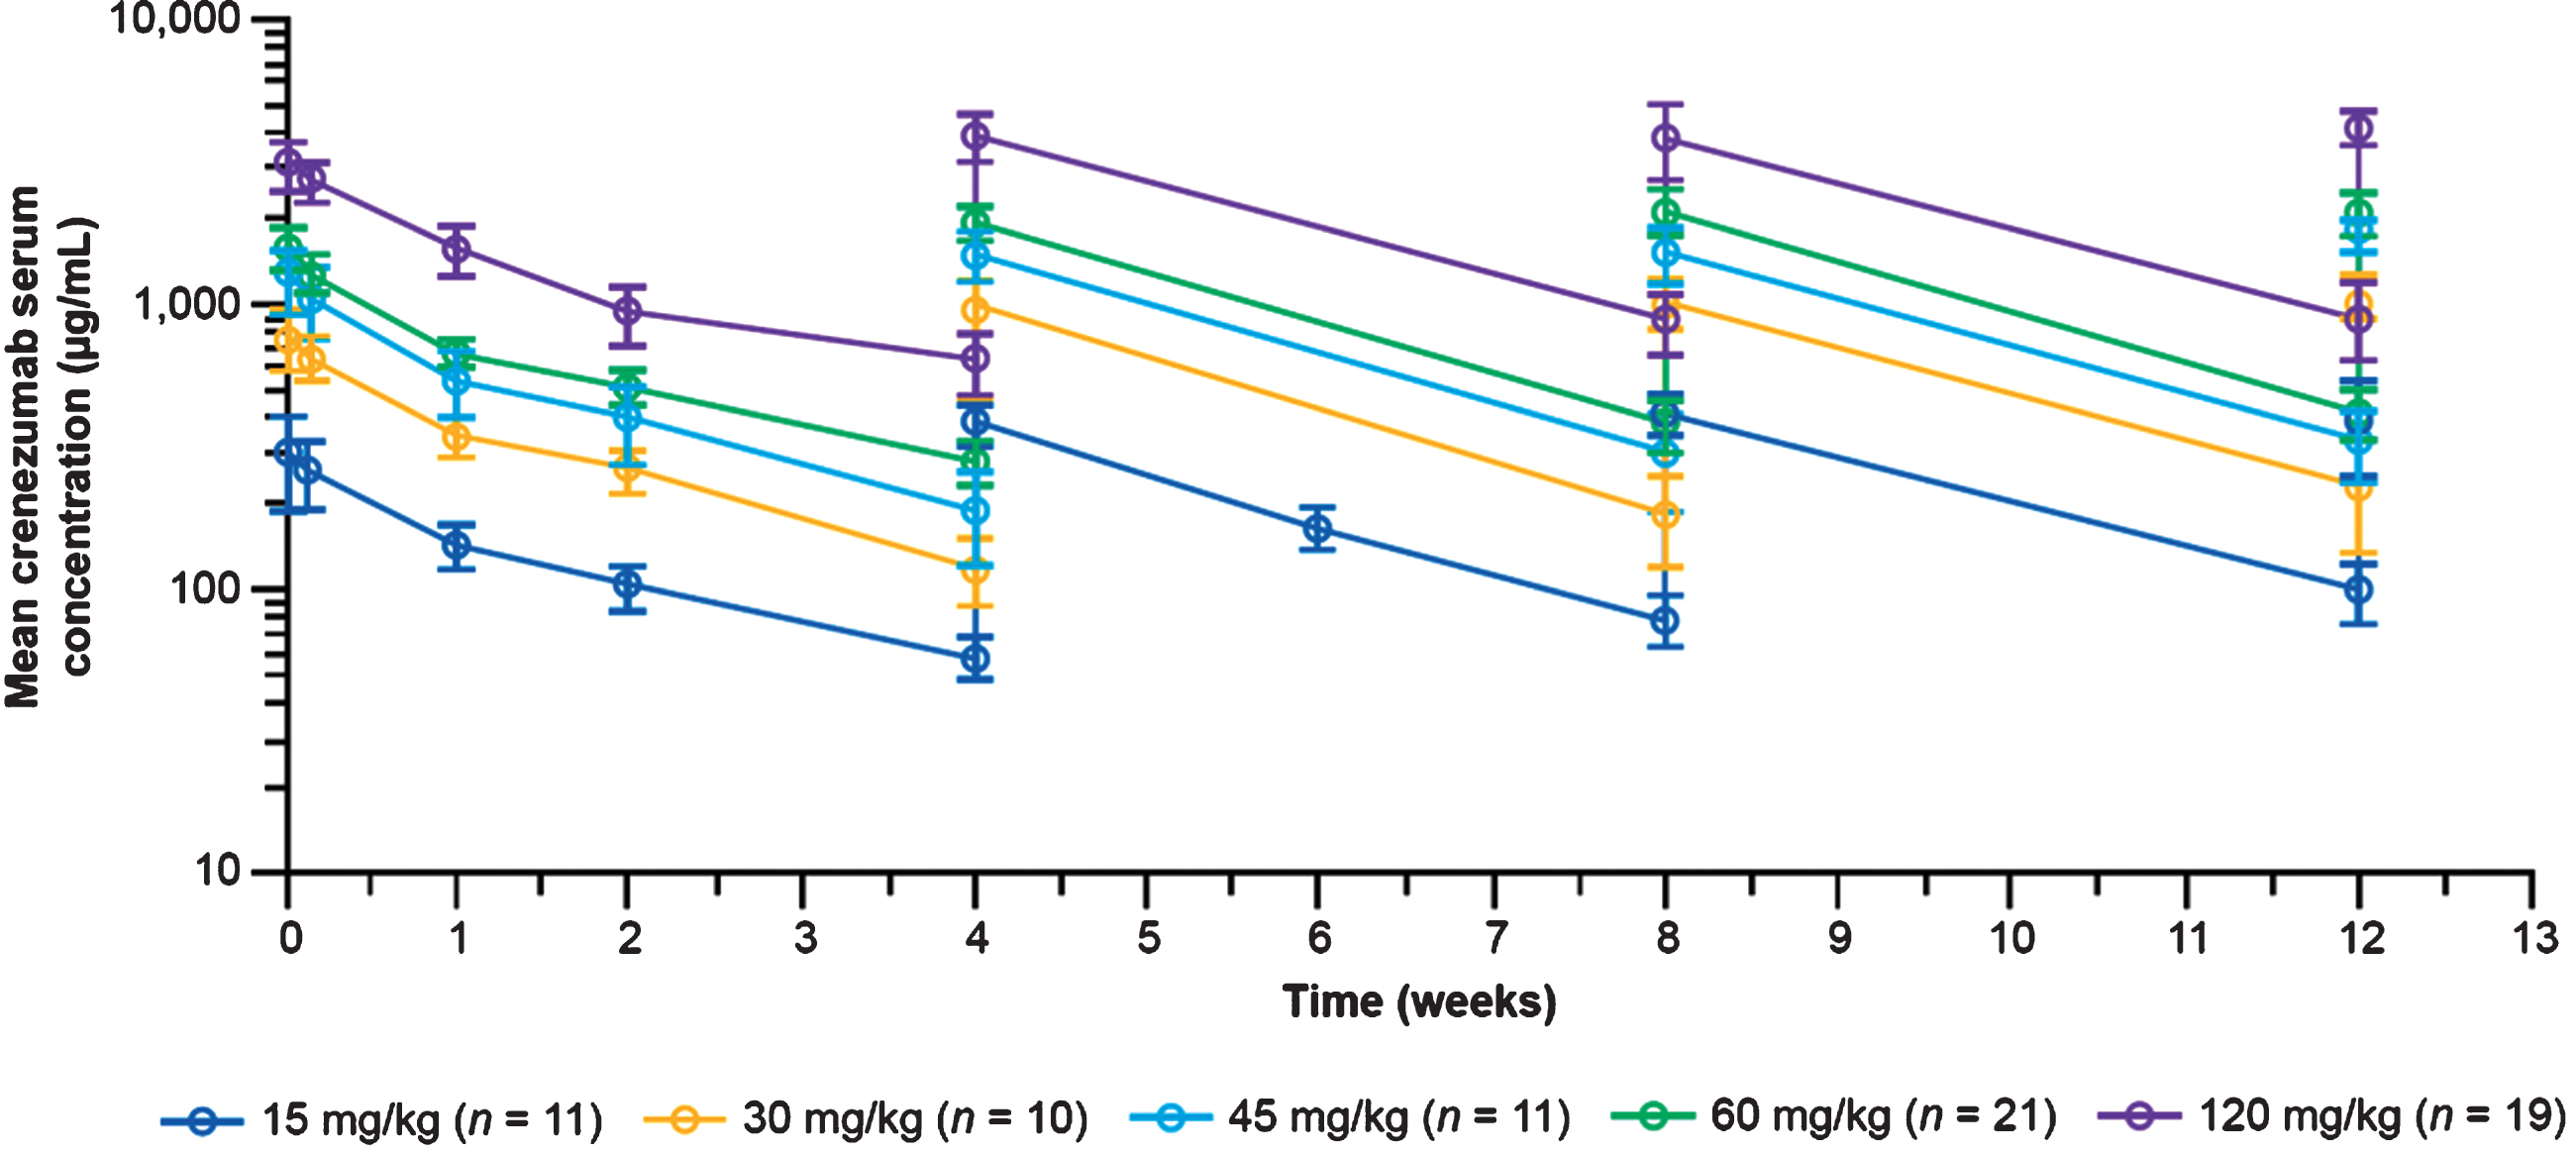 Mean (SD) serum crenezumab concentrations. Data shown are from the Phase II ABBY study (SRI cohort) for the 15 mg/kg dose and from the Phase Ib (GN29632) study reported here for the 30–120 mg/kg doses during the 13-week, randomized, placebo-controlled period. SD, standard deviation; SRI, safety run-in.